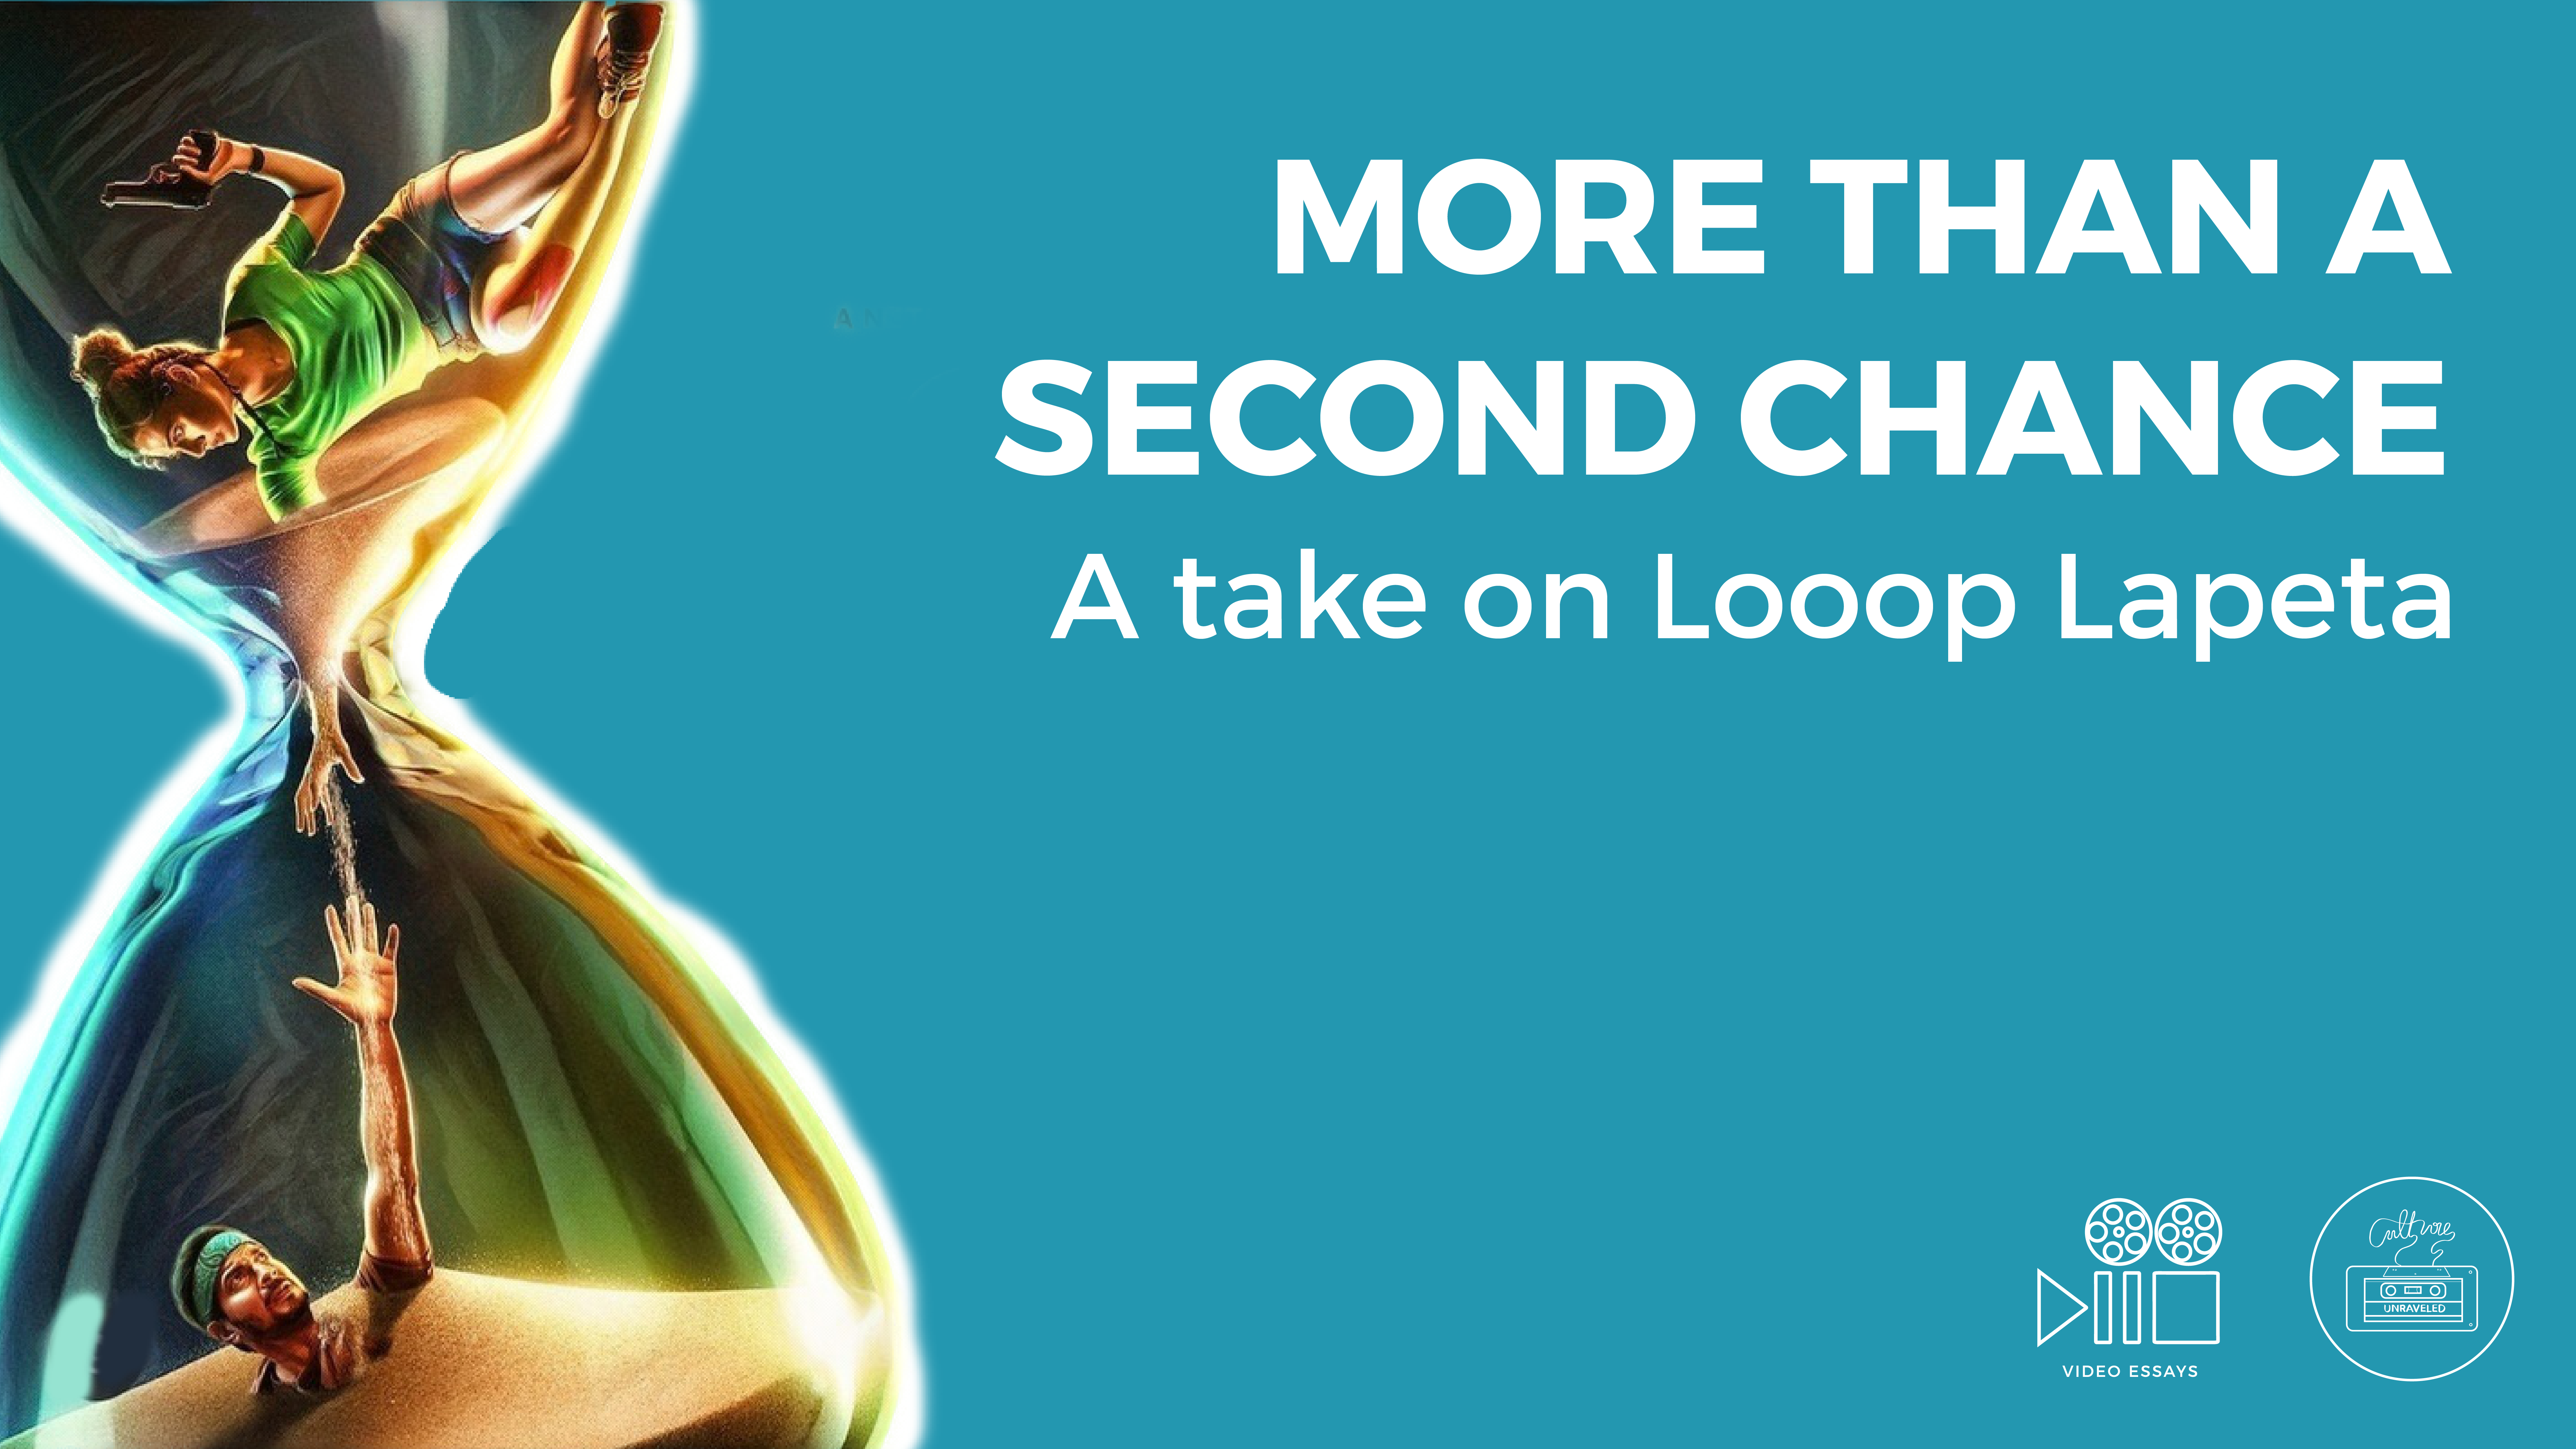 More than a Second Chance. A Take on Looop Lapeta